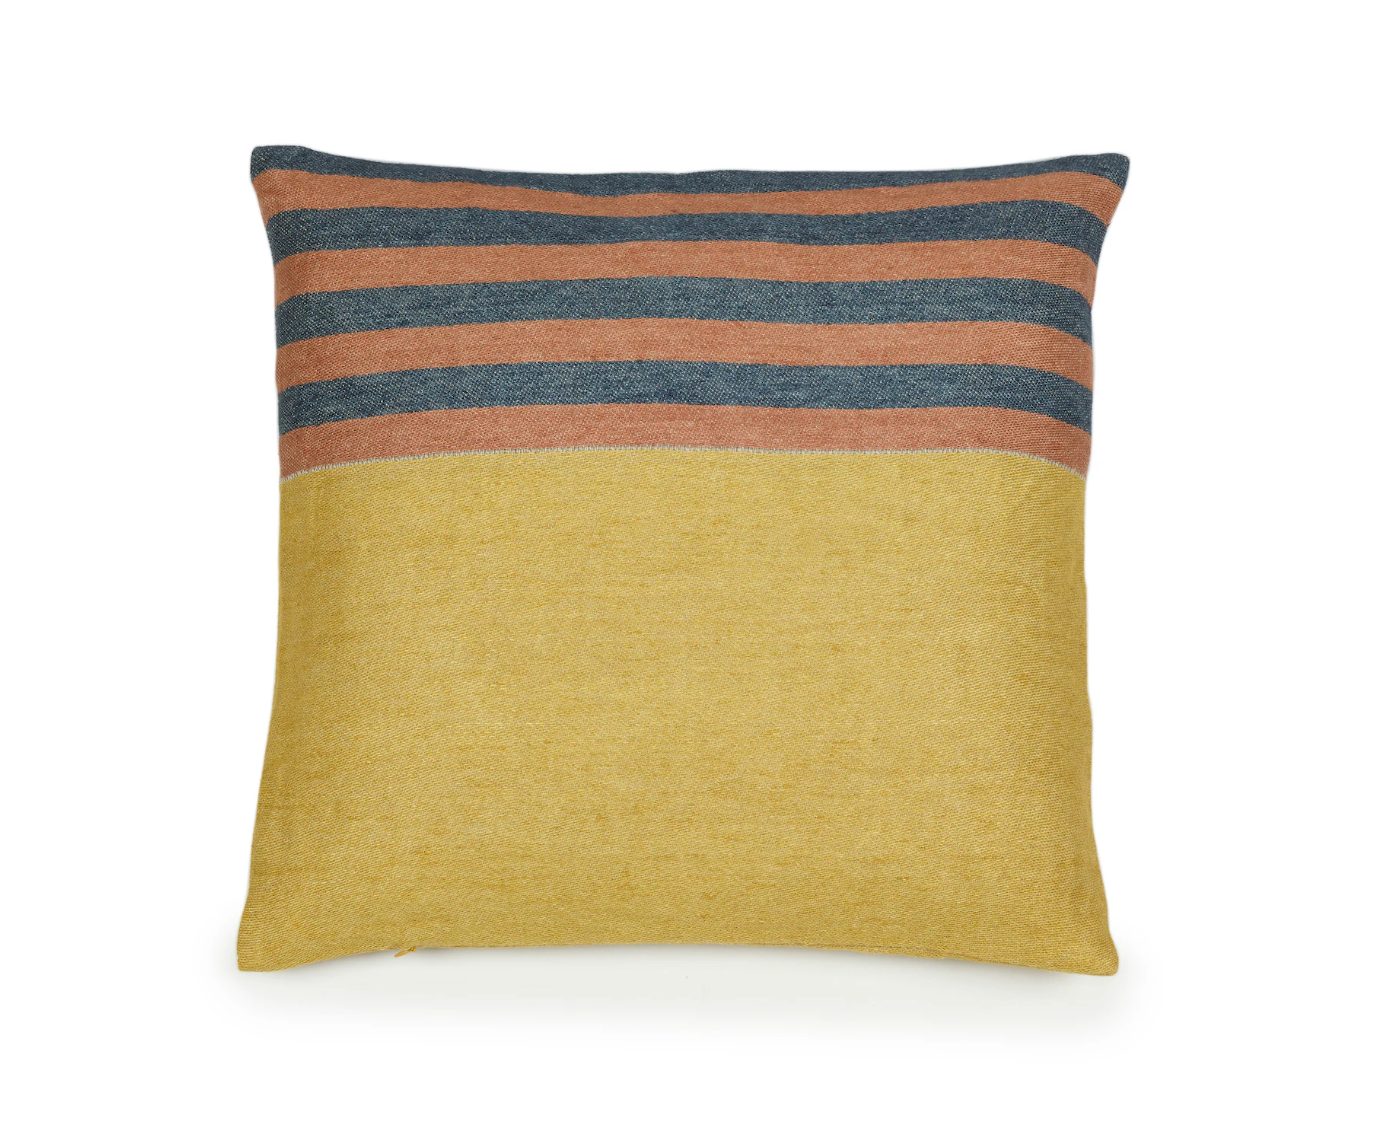 Red Earth pillow cover by Libeco